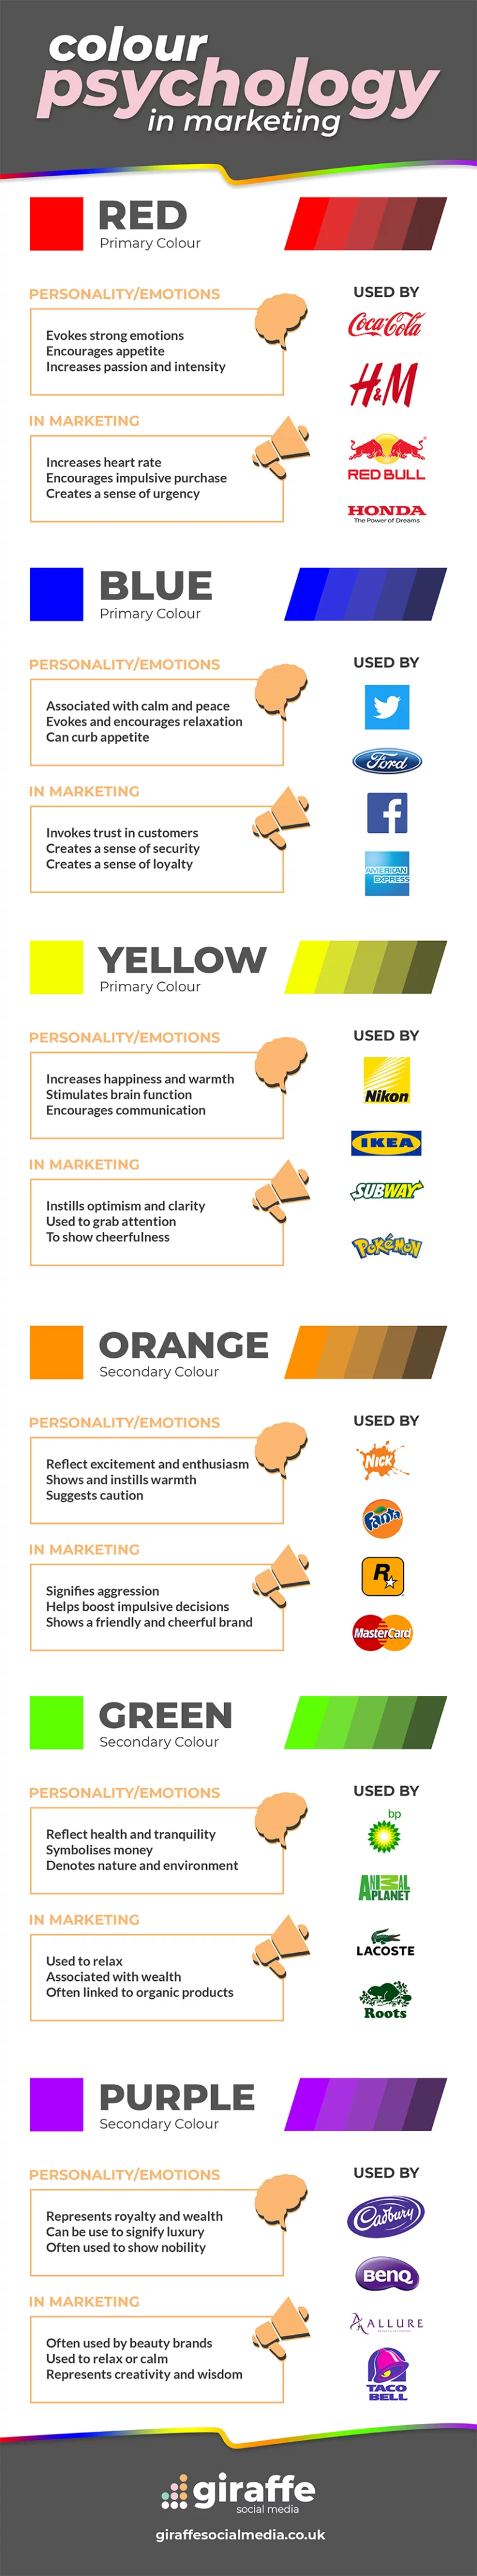 Colors in marketing infographic